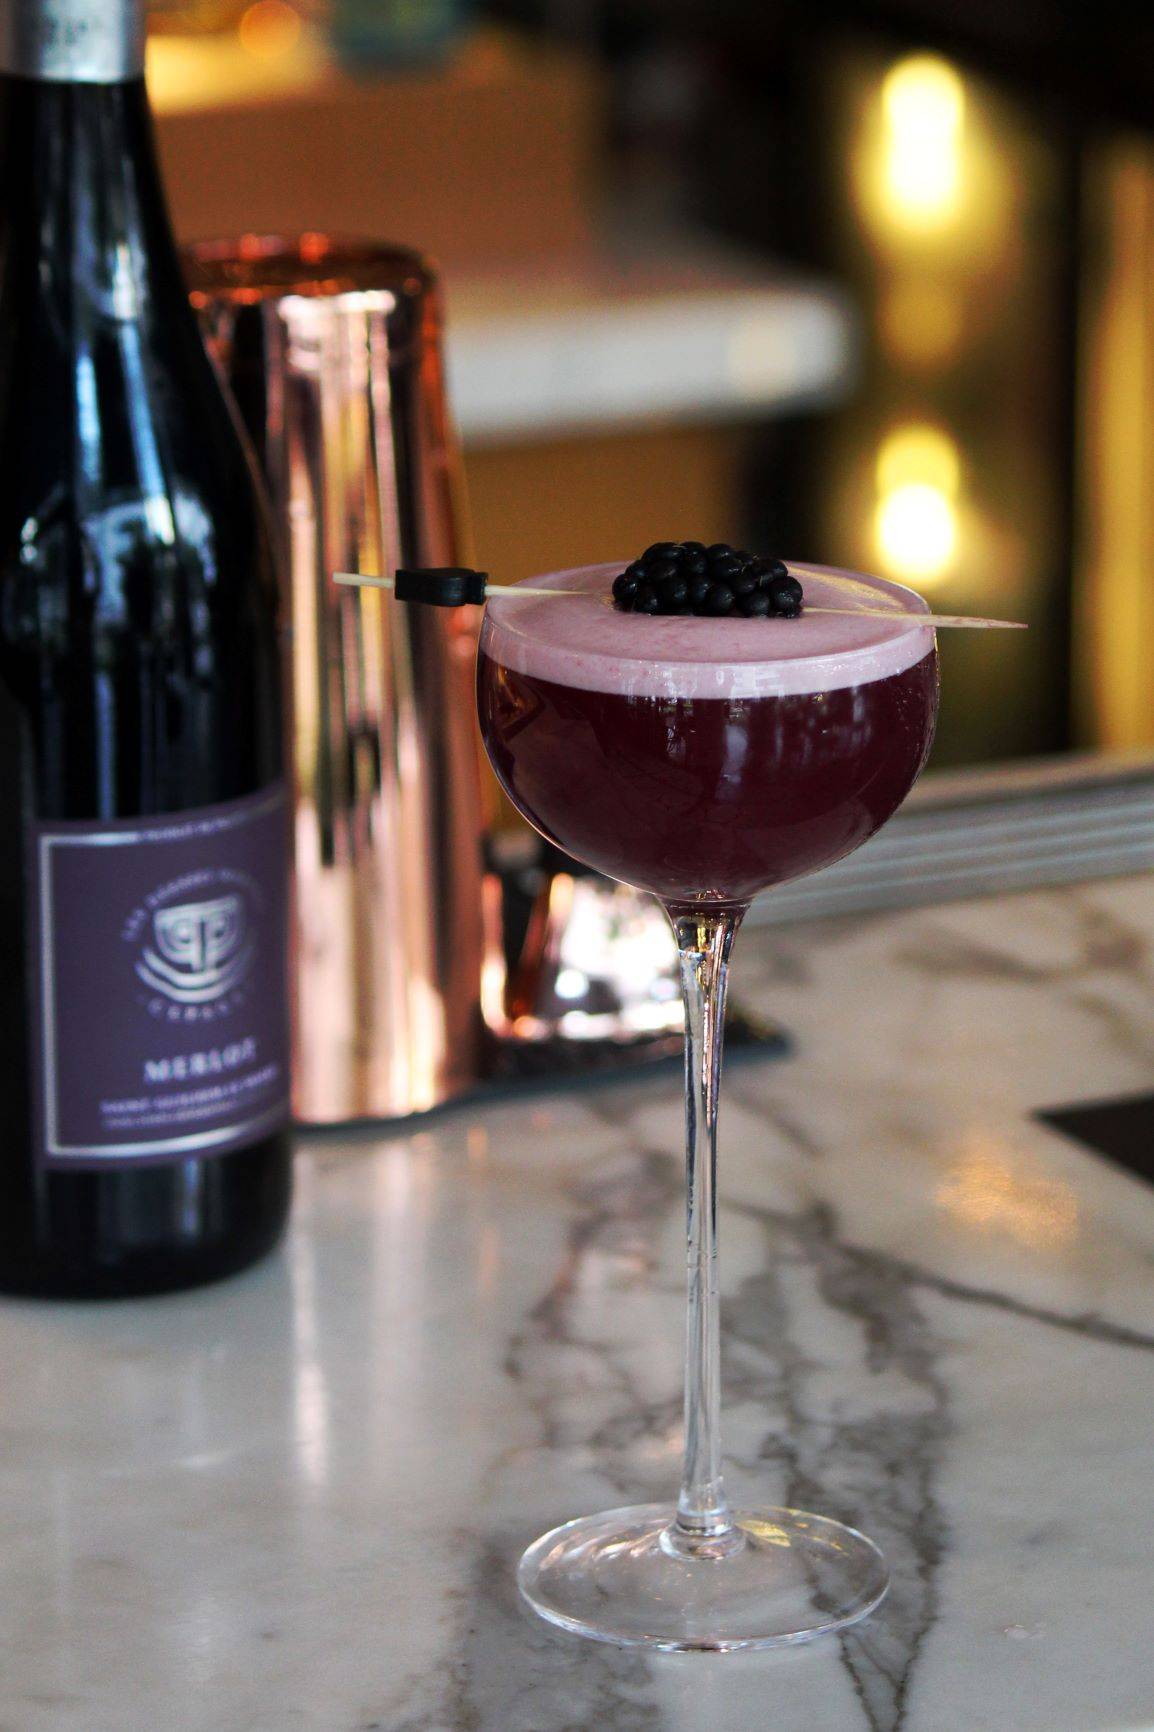 SHAKING THINGS UP WITH NEW COCKTAILS AT GINETT